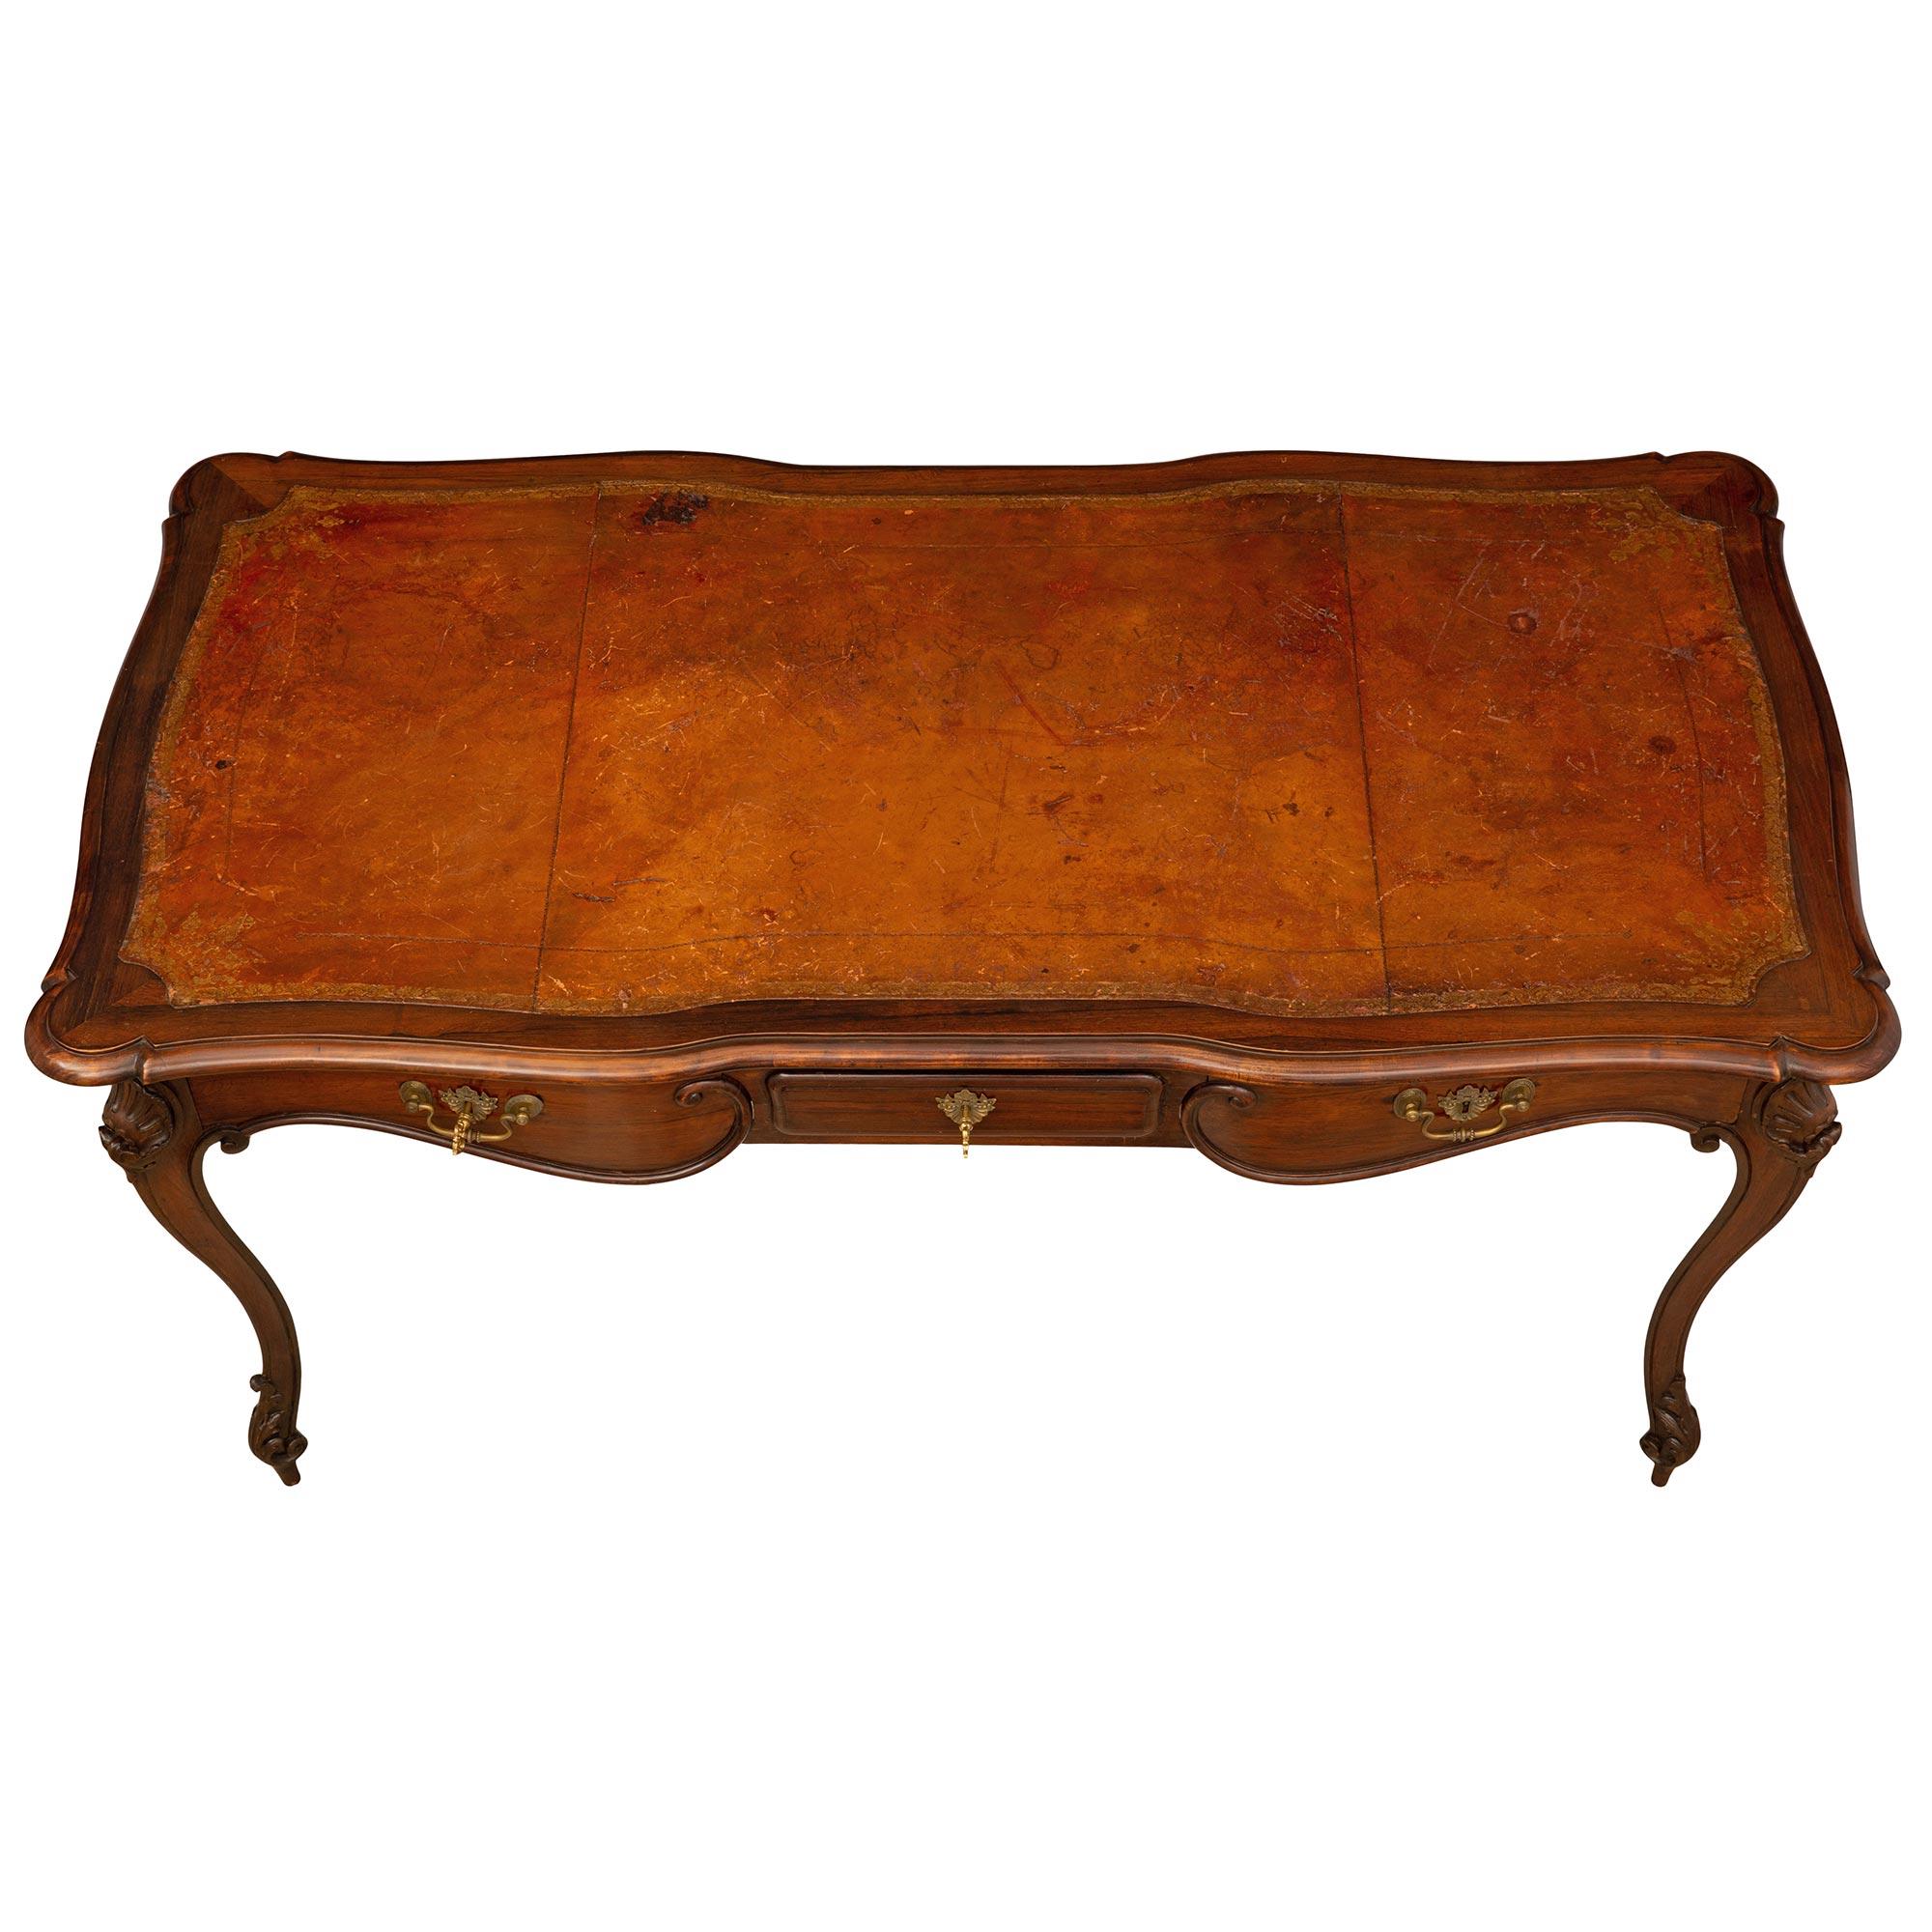 A most elegant French 18th century Louis XV period Rosewood and bronze desk. The desk is raised by four elegant tapered cabriole legs with fine scrolled acanthus leaf designed feet and beautiful richly carved seashell reserves at each corner. The